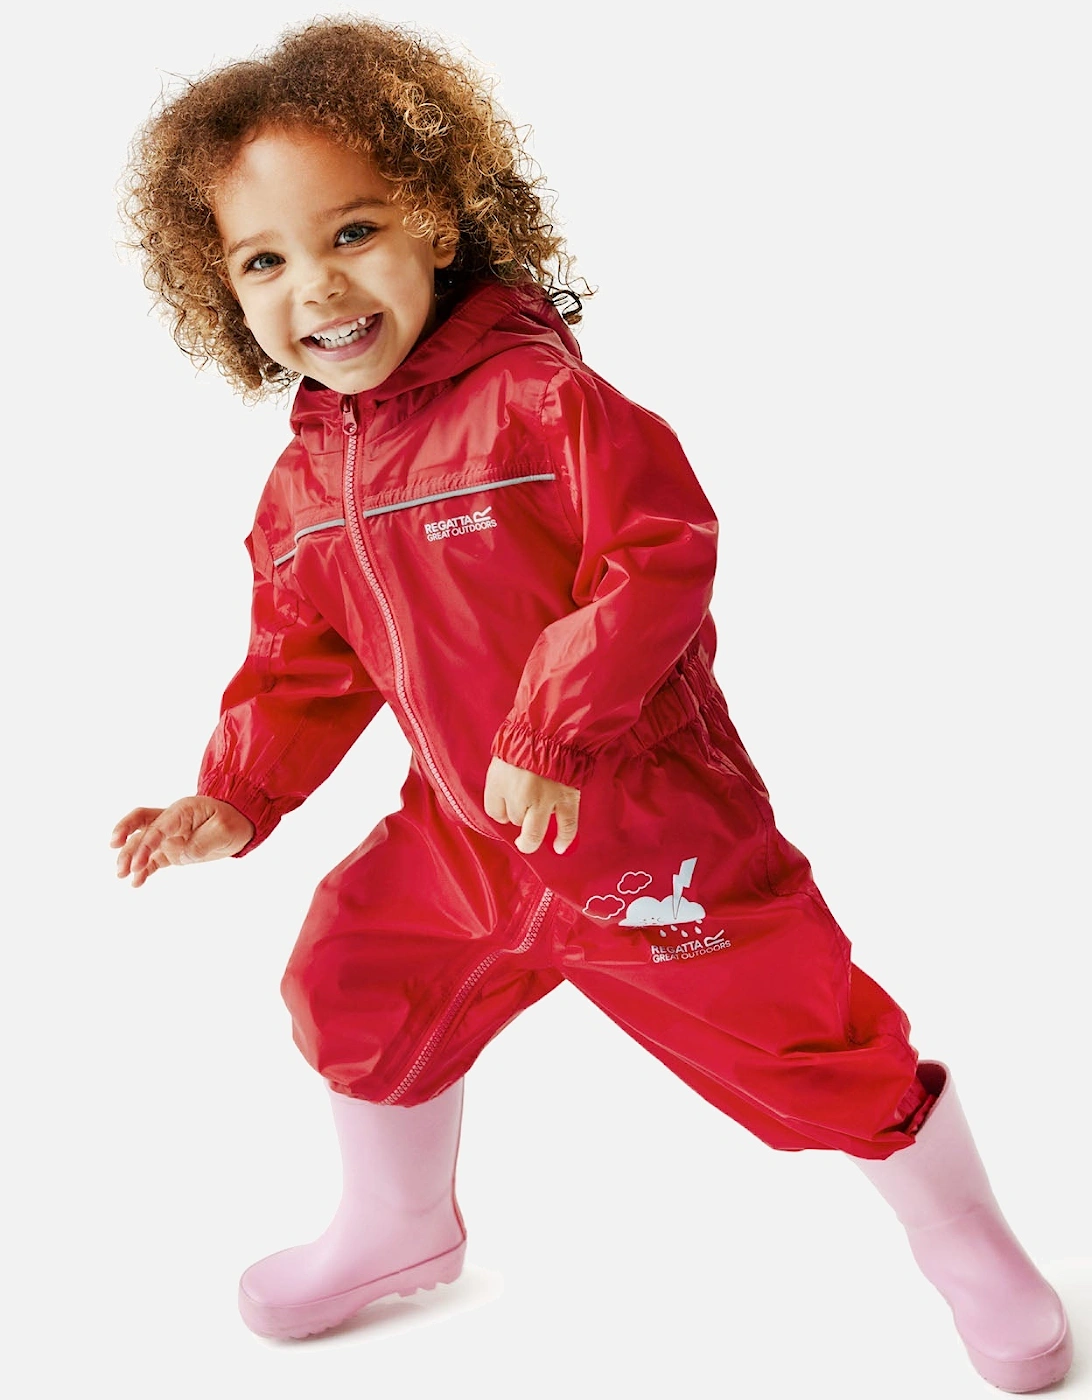 Kids Puddle IV Waterproof Puddle Suit